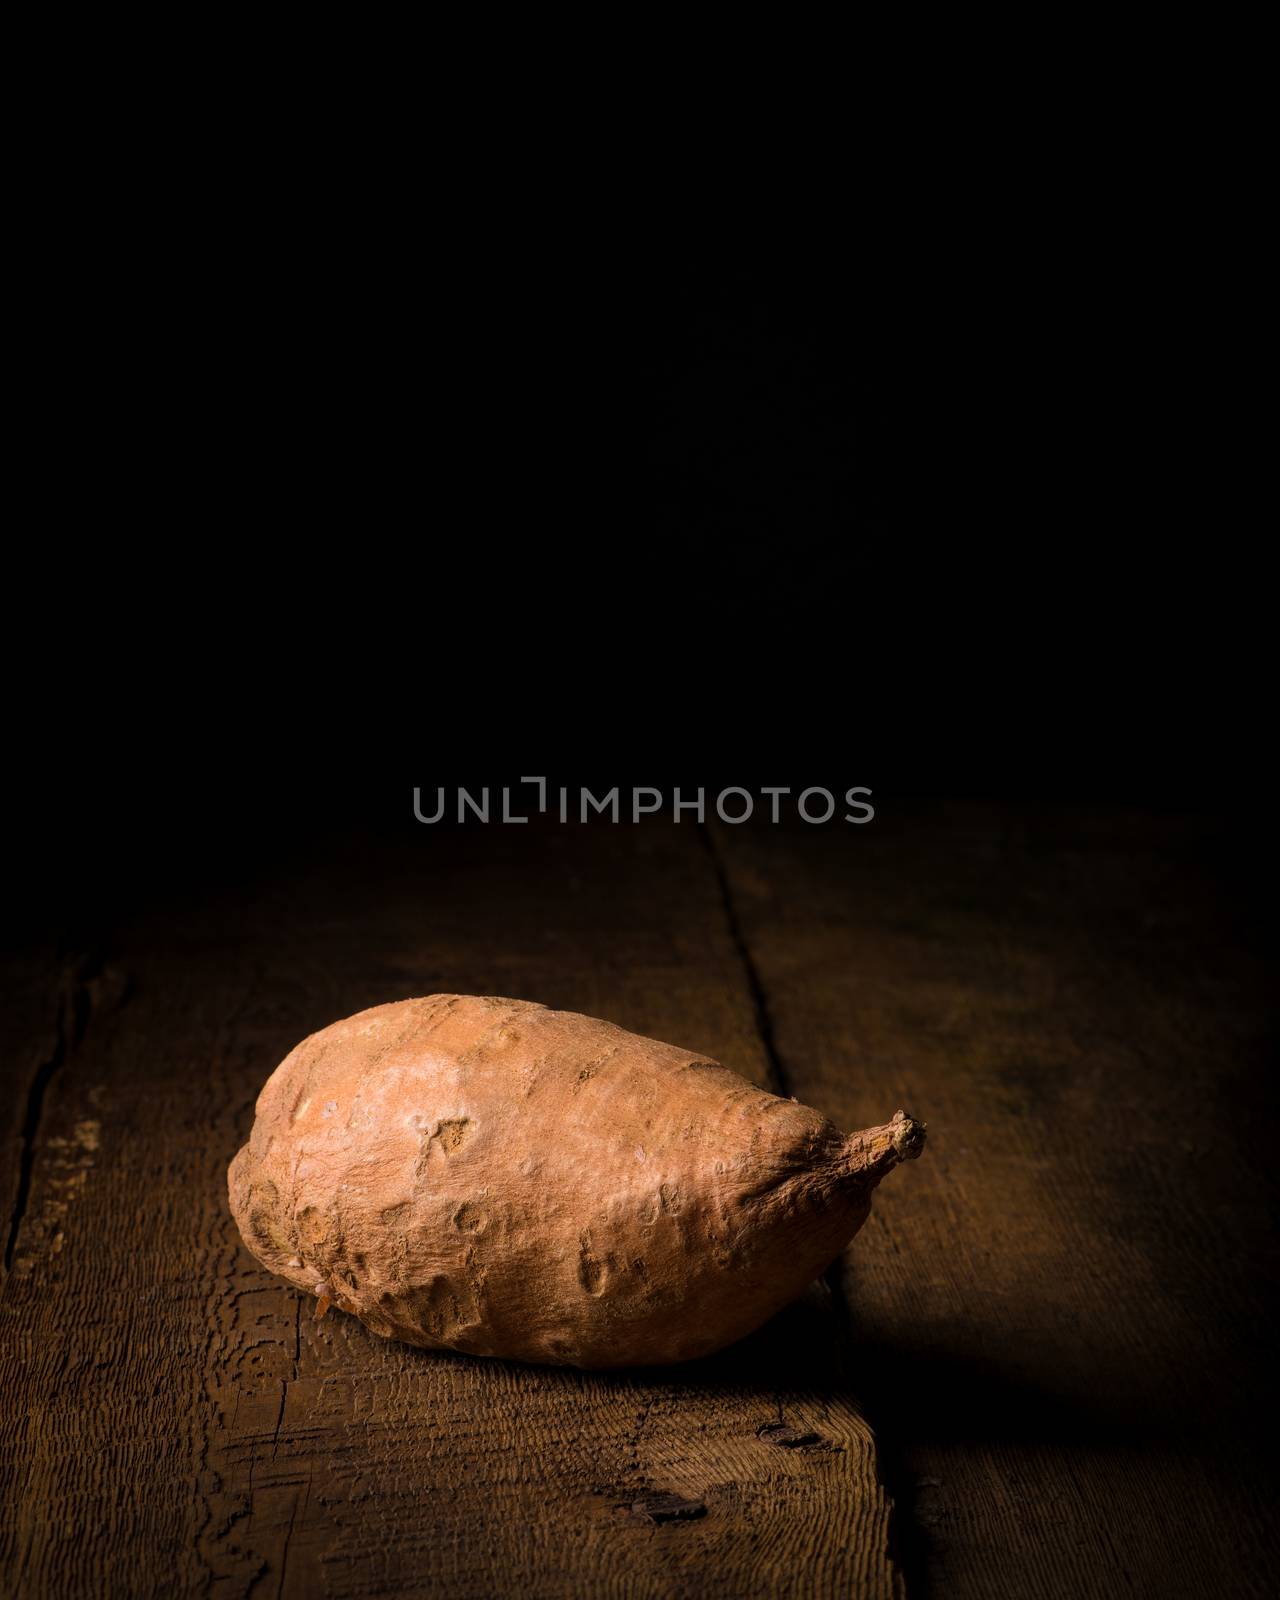 Single yam photographed on a low key background suitable for book covers and food industry marketing material.